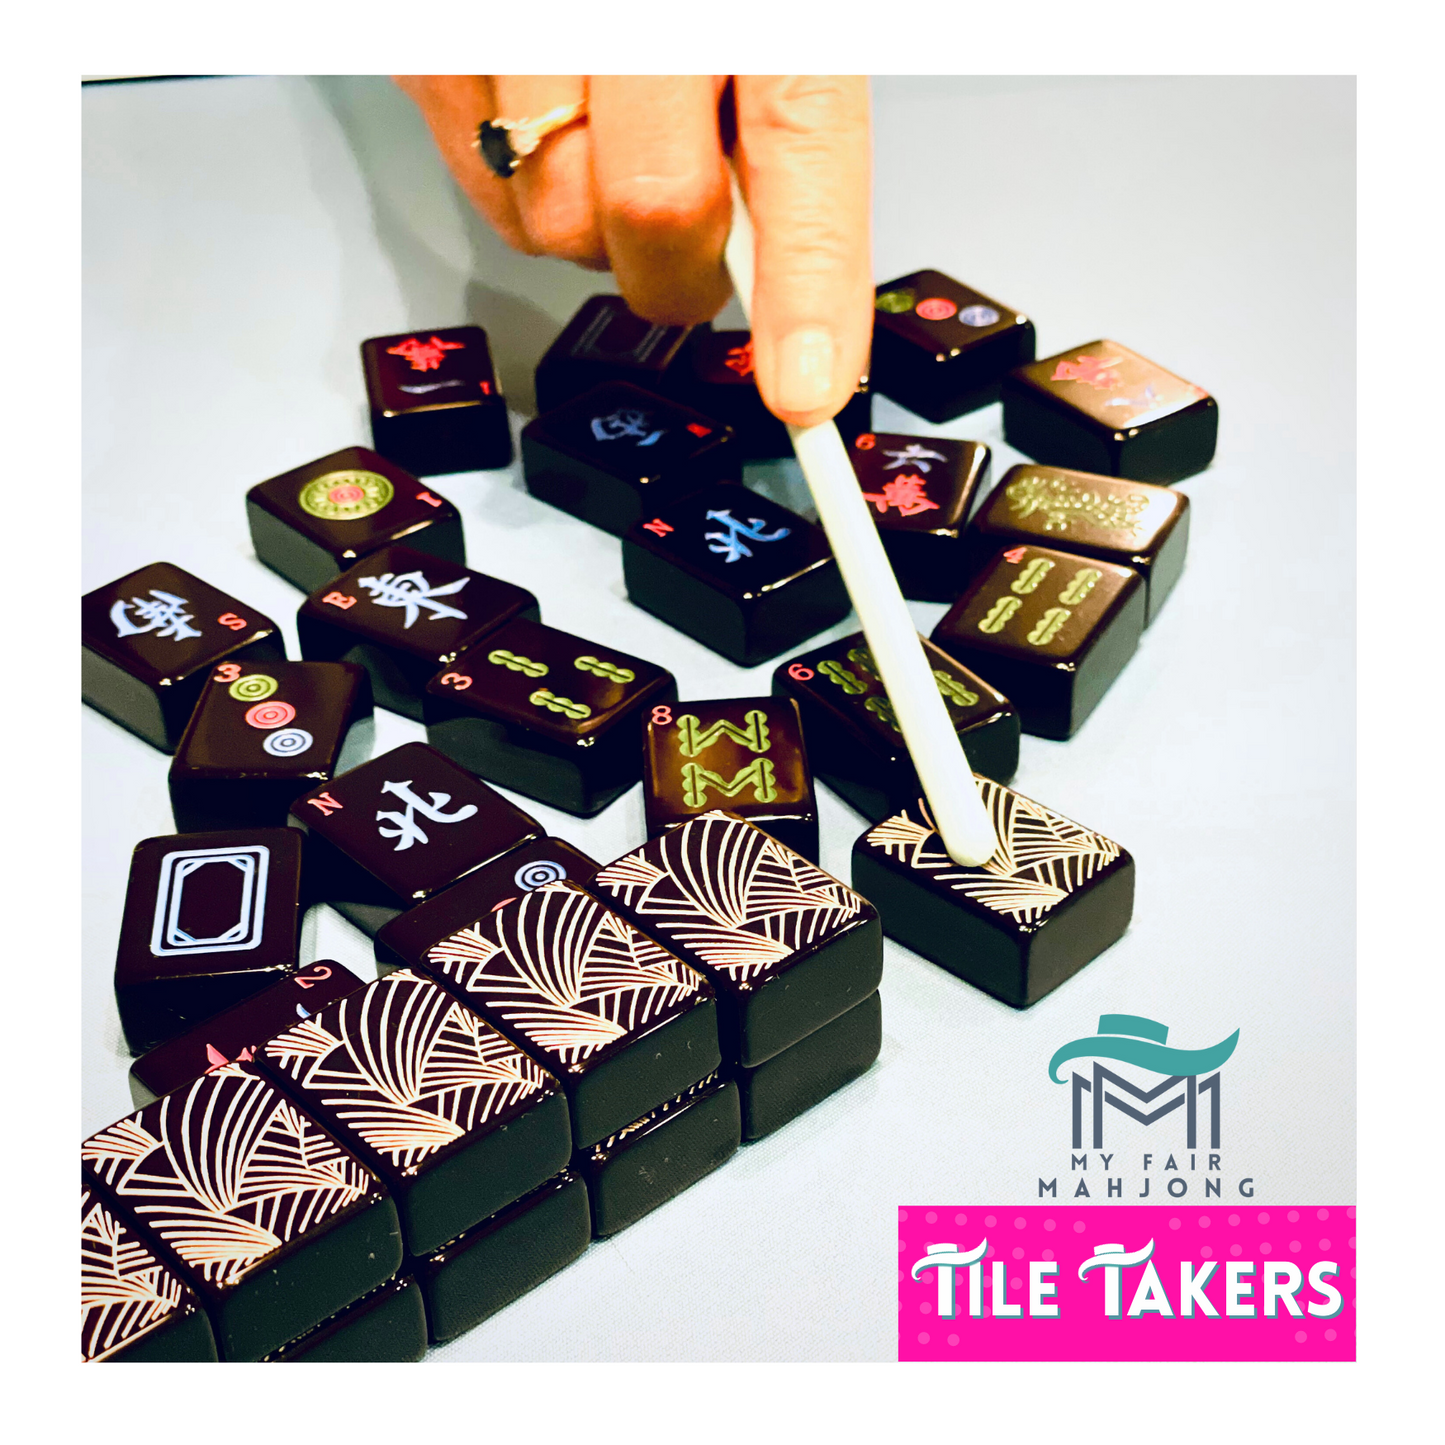 Mahjong Tile Takers. Novelty Mahjongg gift to reach and pull Mah Jongg tiles. 4 bright colors, fun gift present favor or prize for party or tournament 